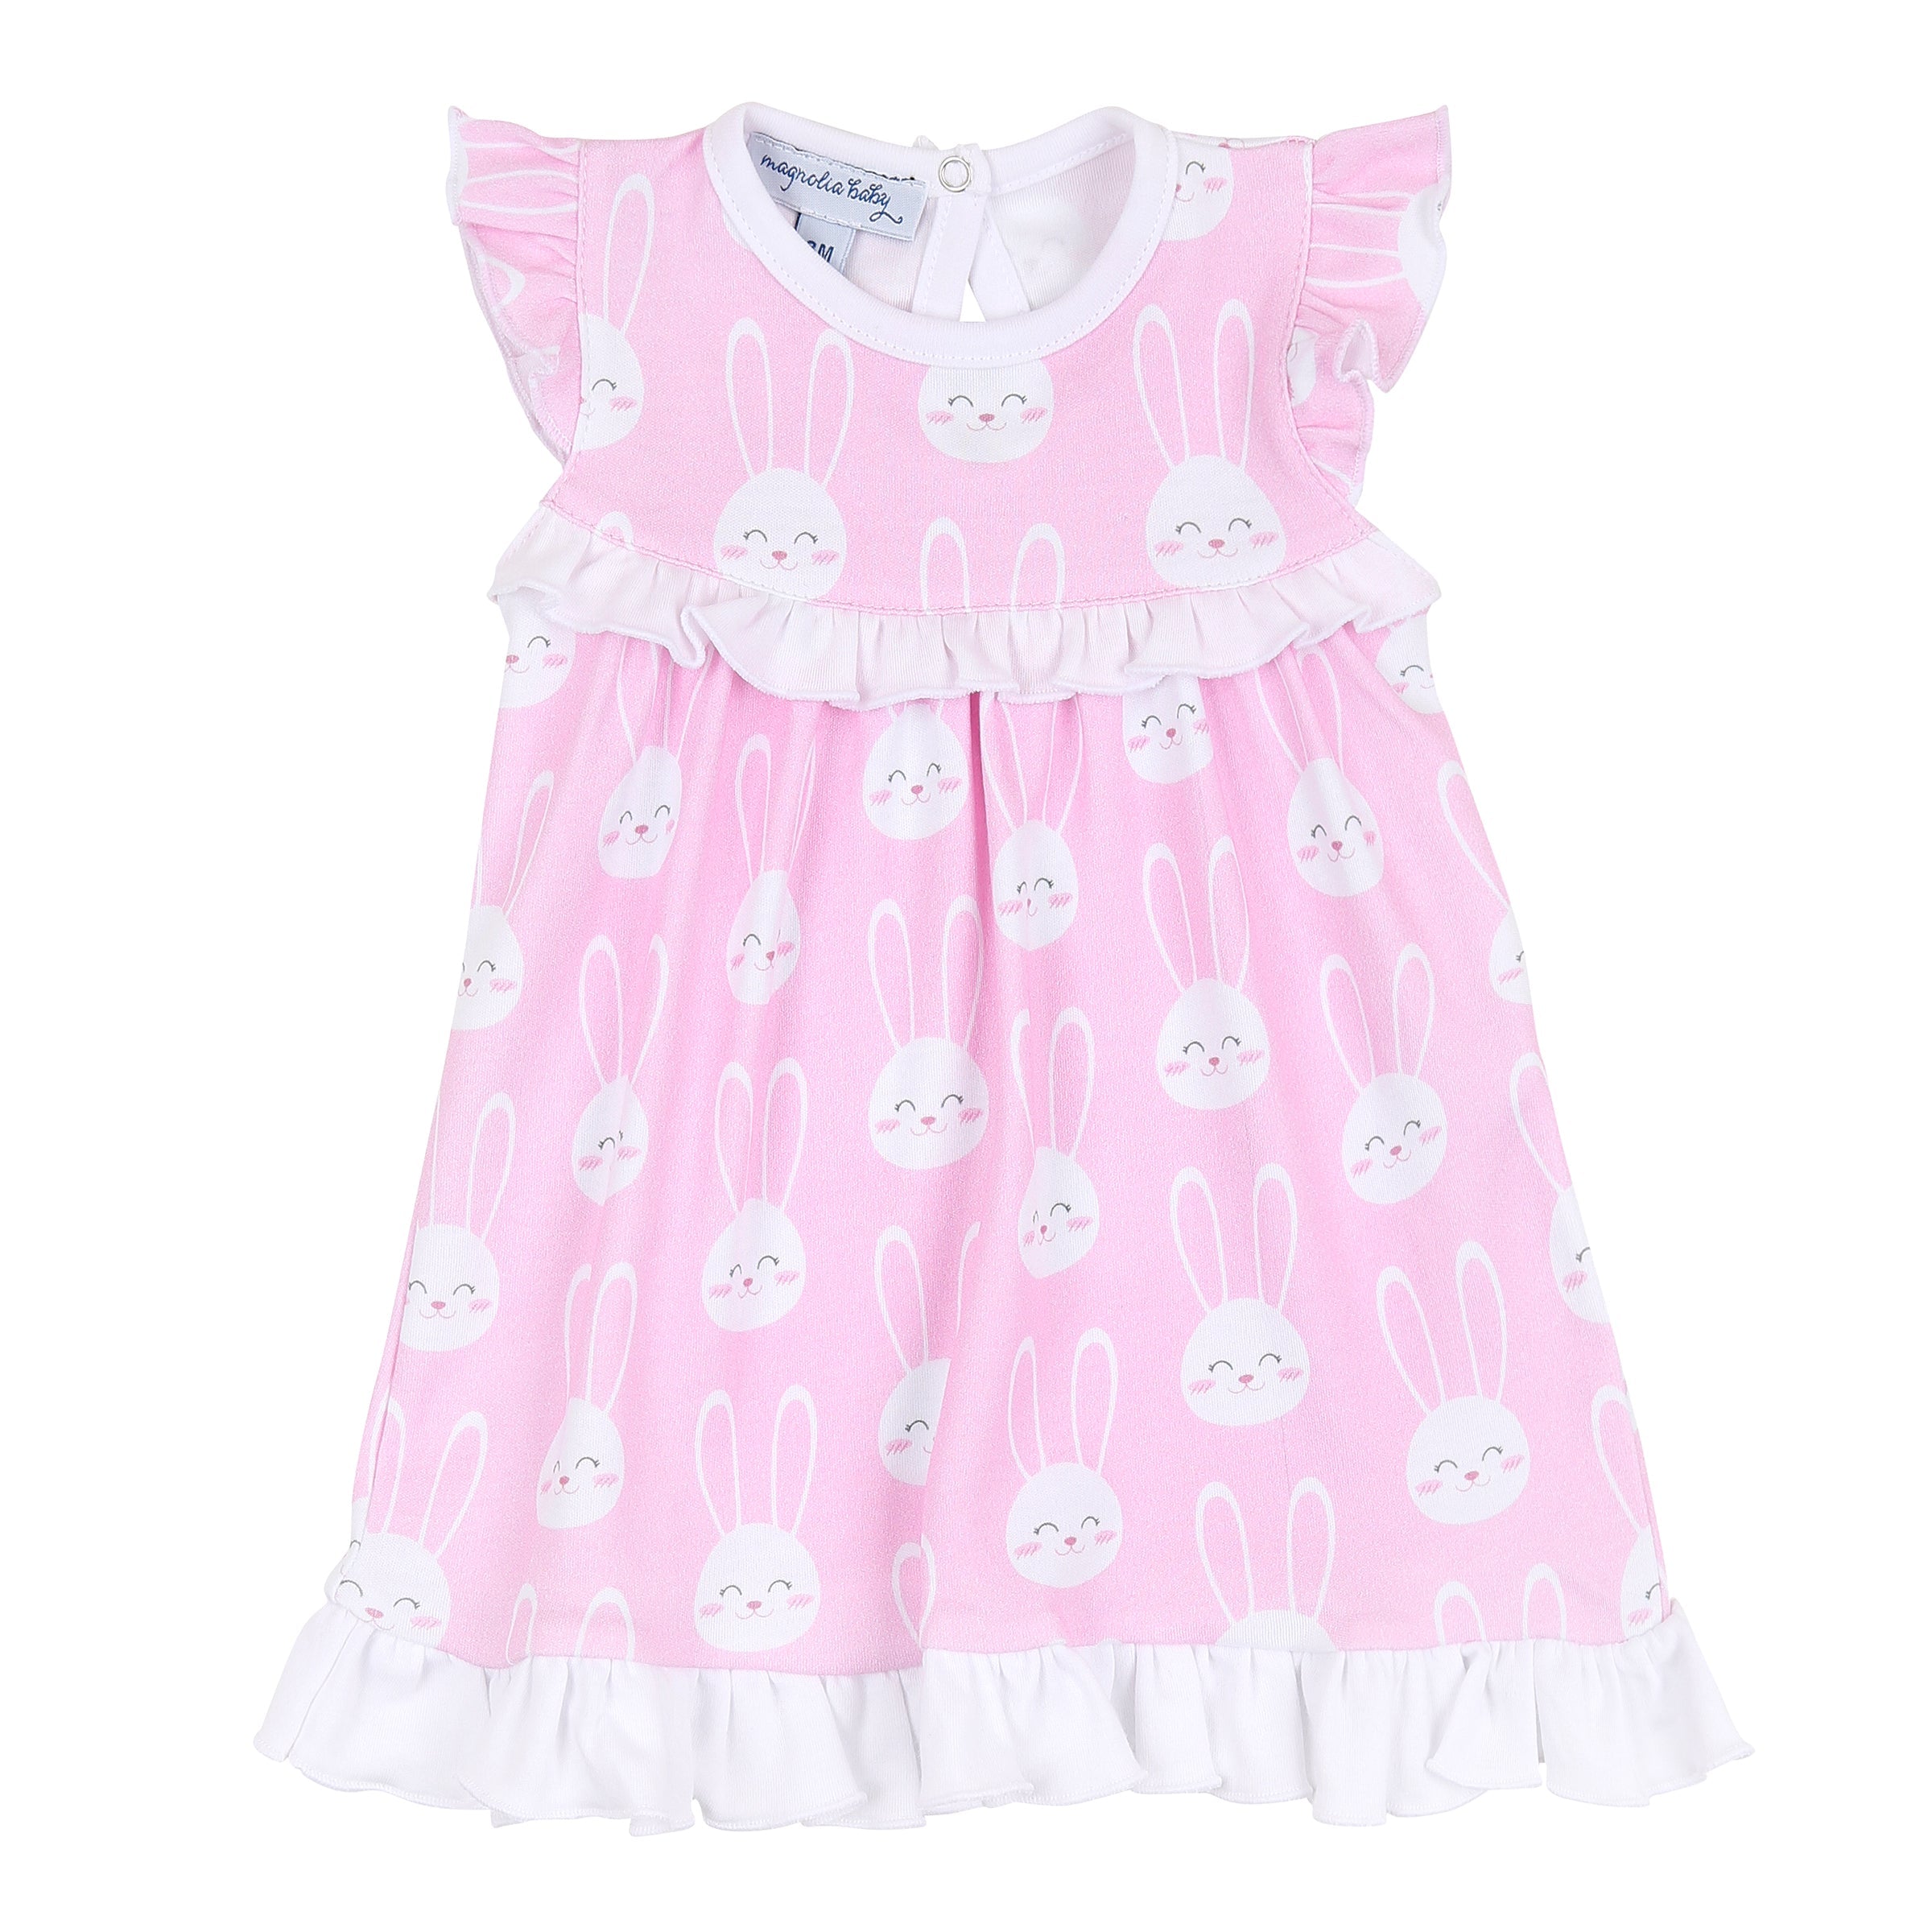 Magnolia Baby Pink All Ears Printed Ruffle Flutters Dress Set